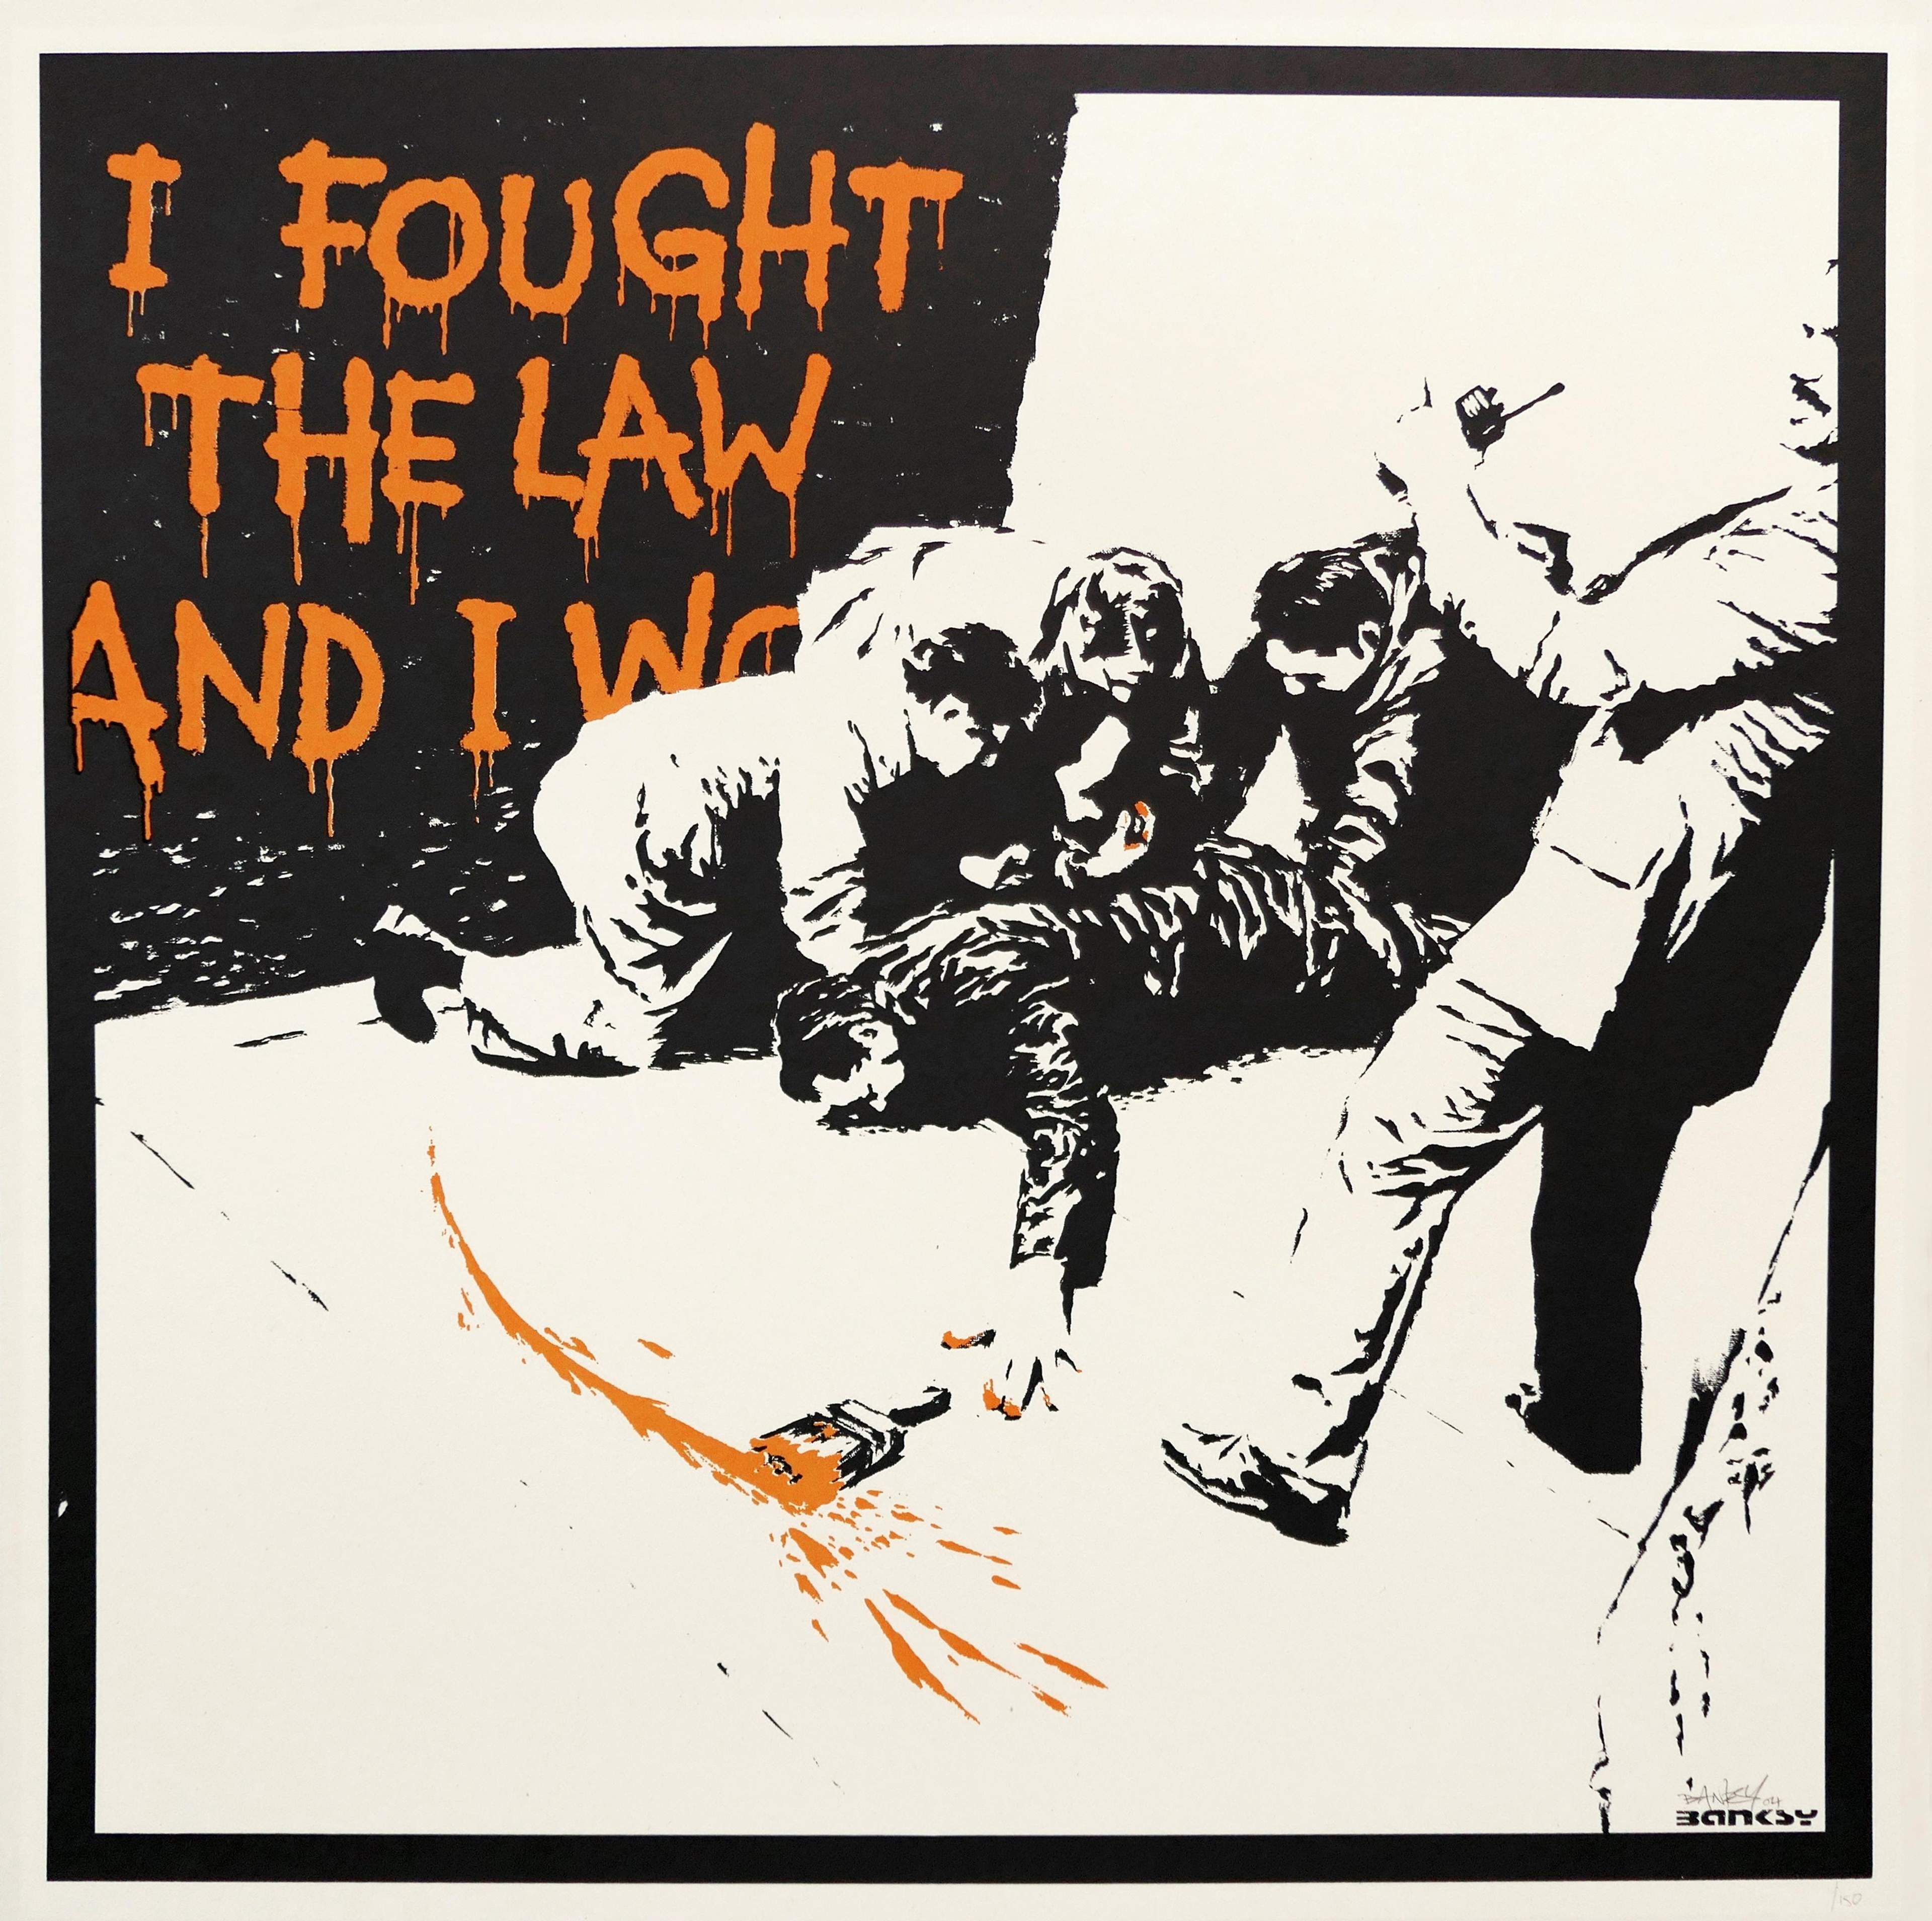 F**k the Police: The Theme of Disorder & Authority in Banksy’s Prints